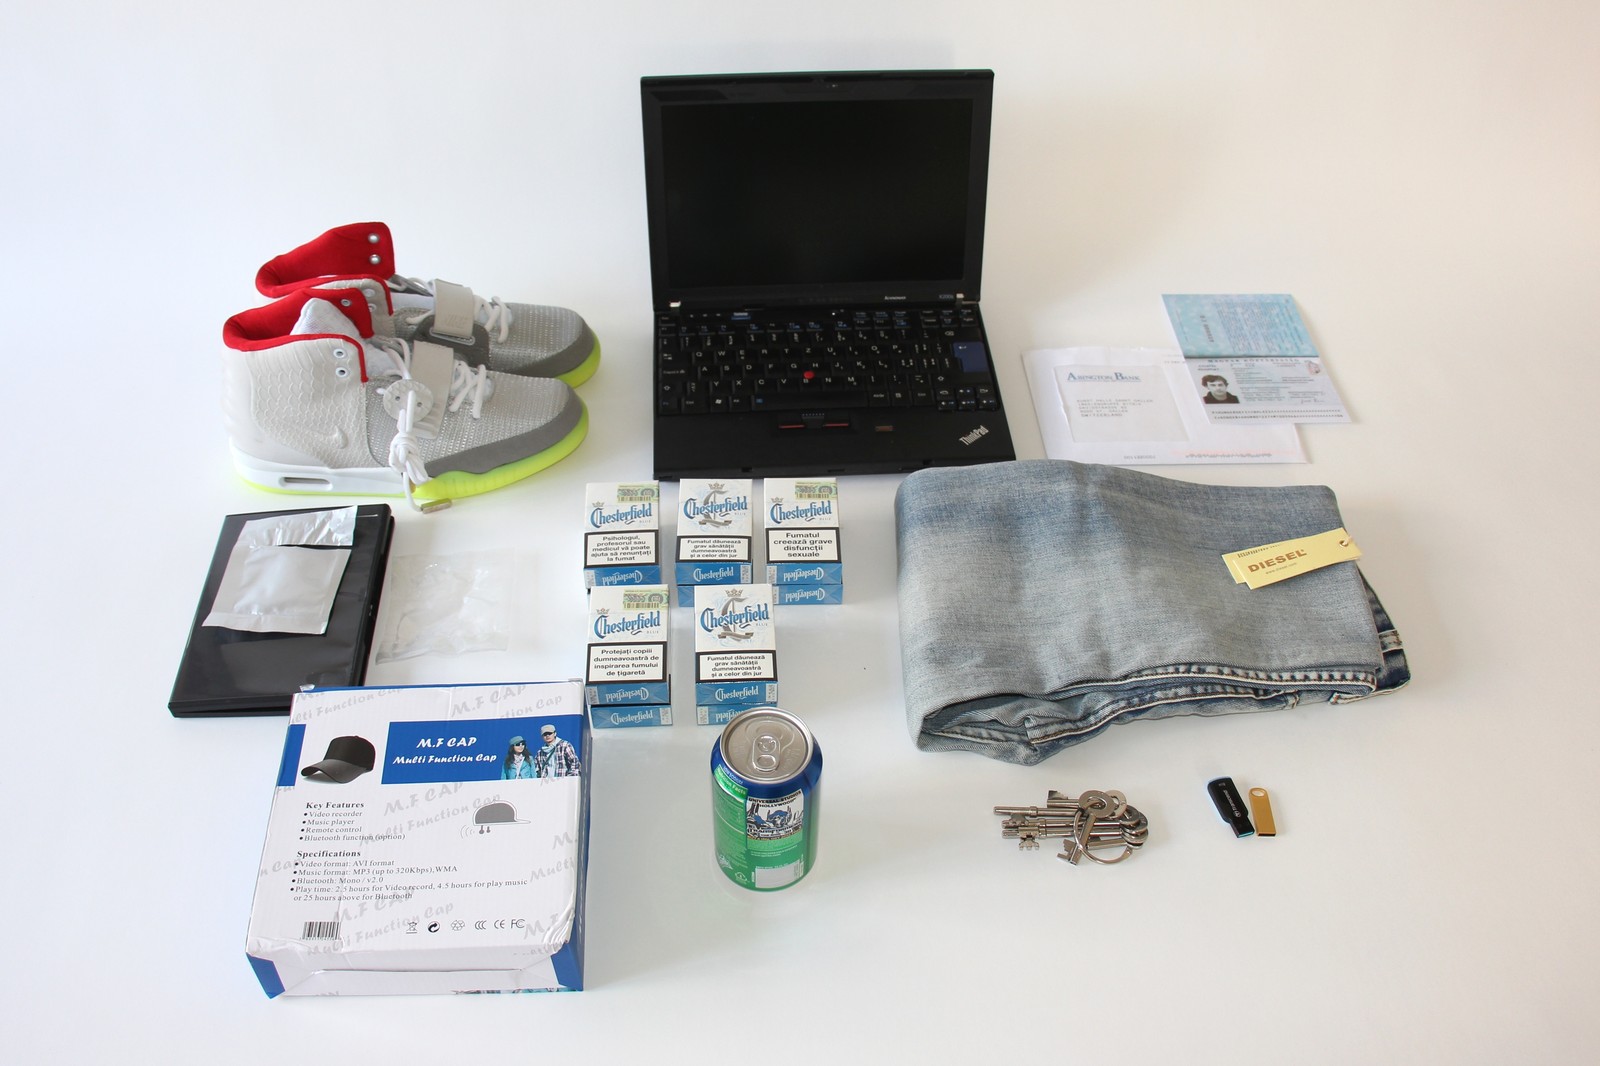 Illegal goods bought by a Darknet bot